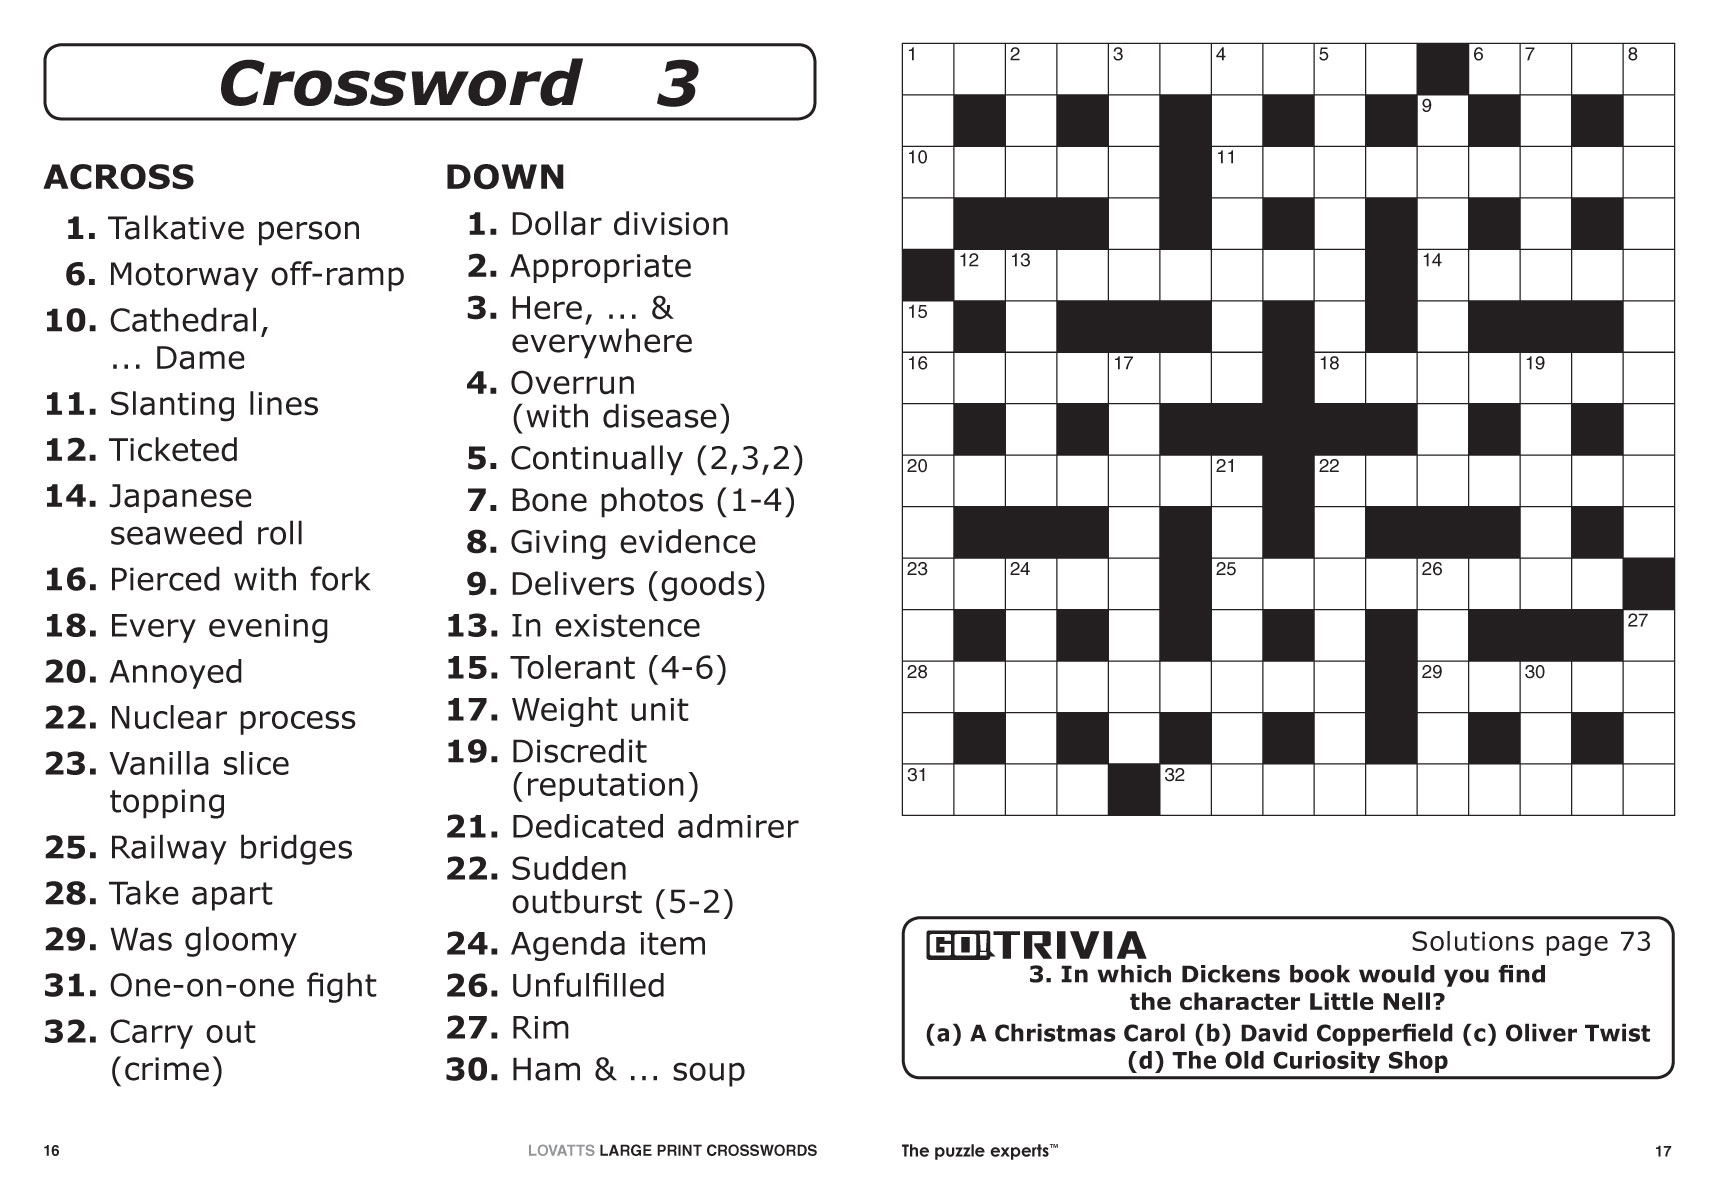 Coloring ~ Marvelous Large Print Crosswords Photo Ideas Free - Printable Crossword For 8 Year Olds